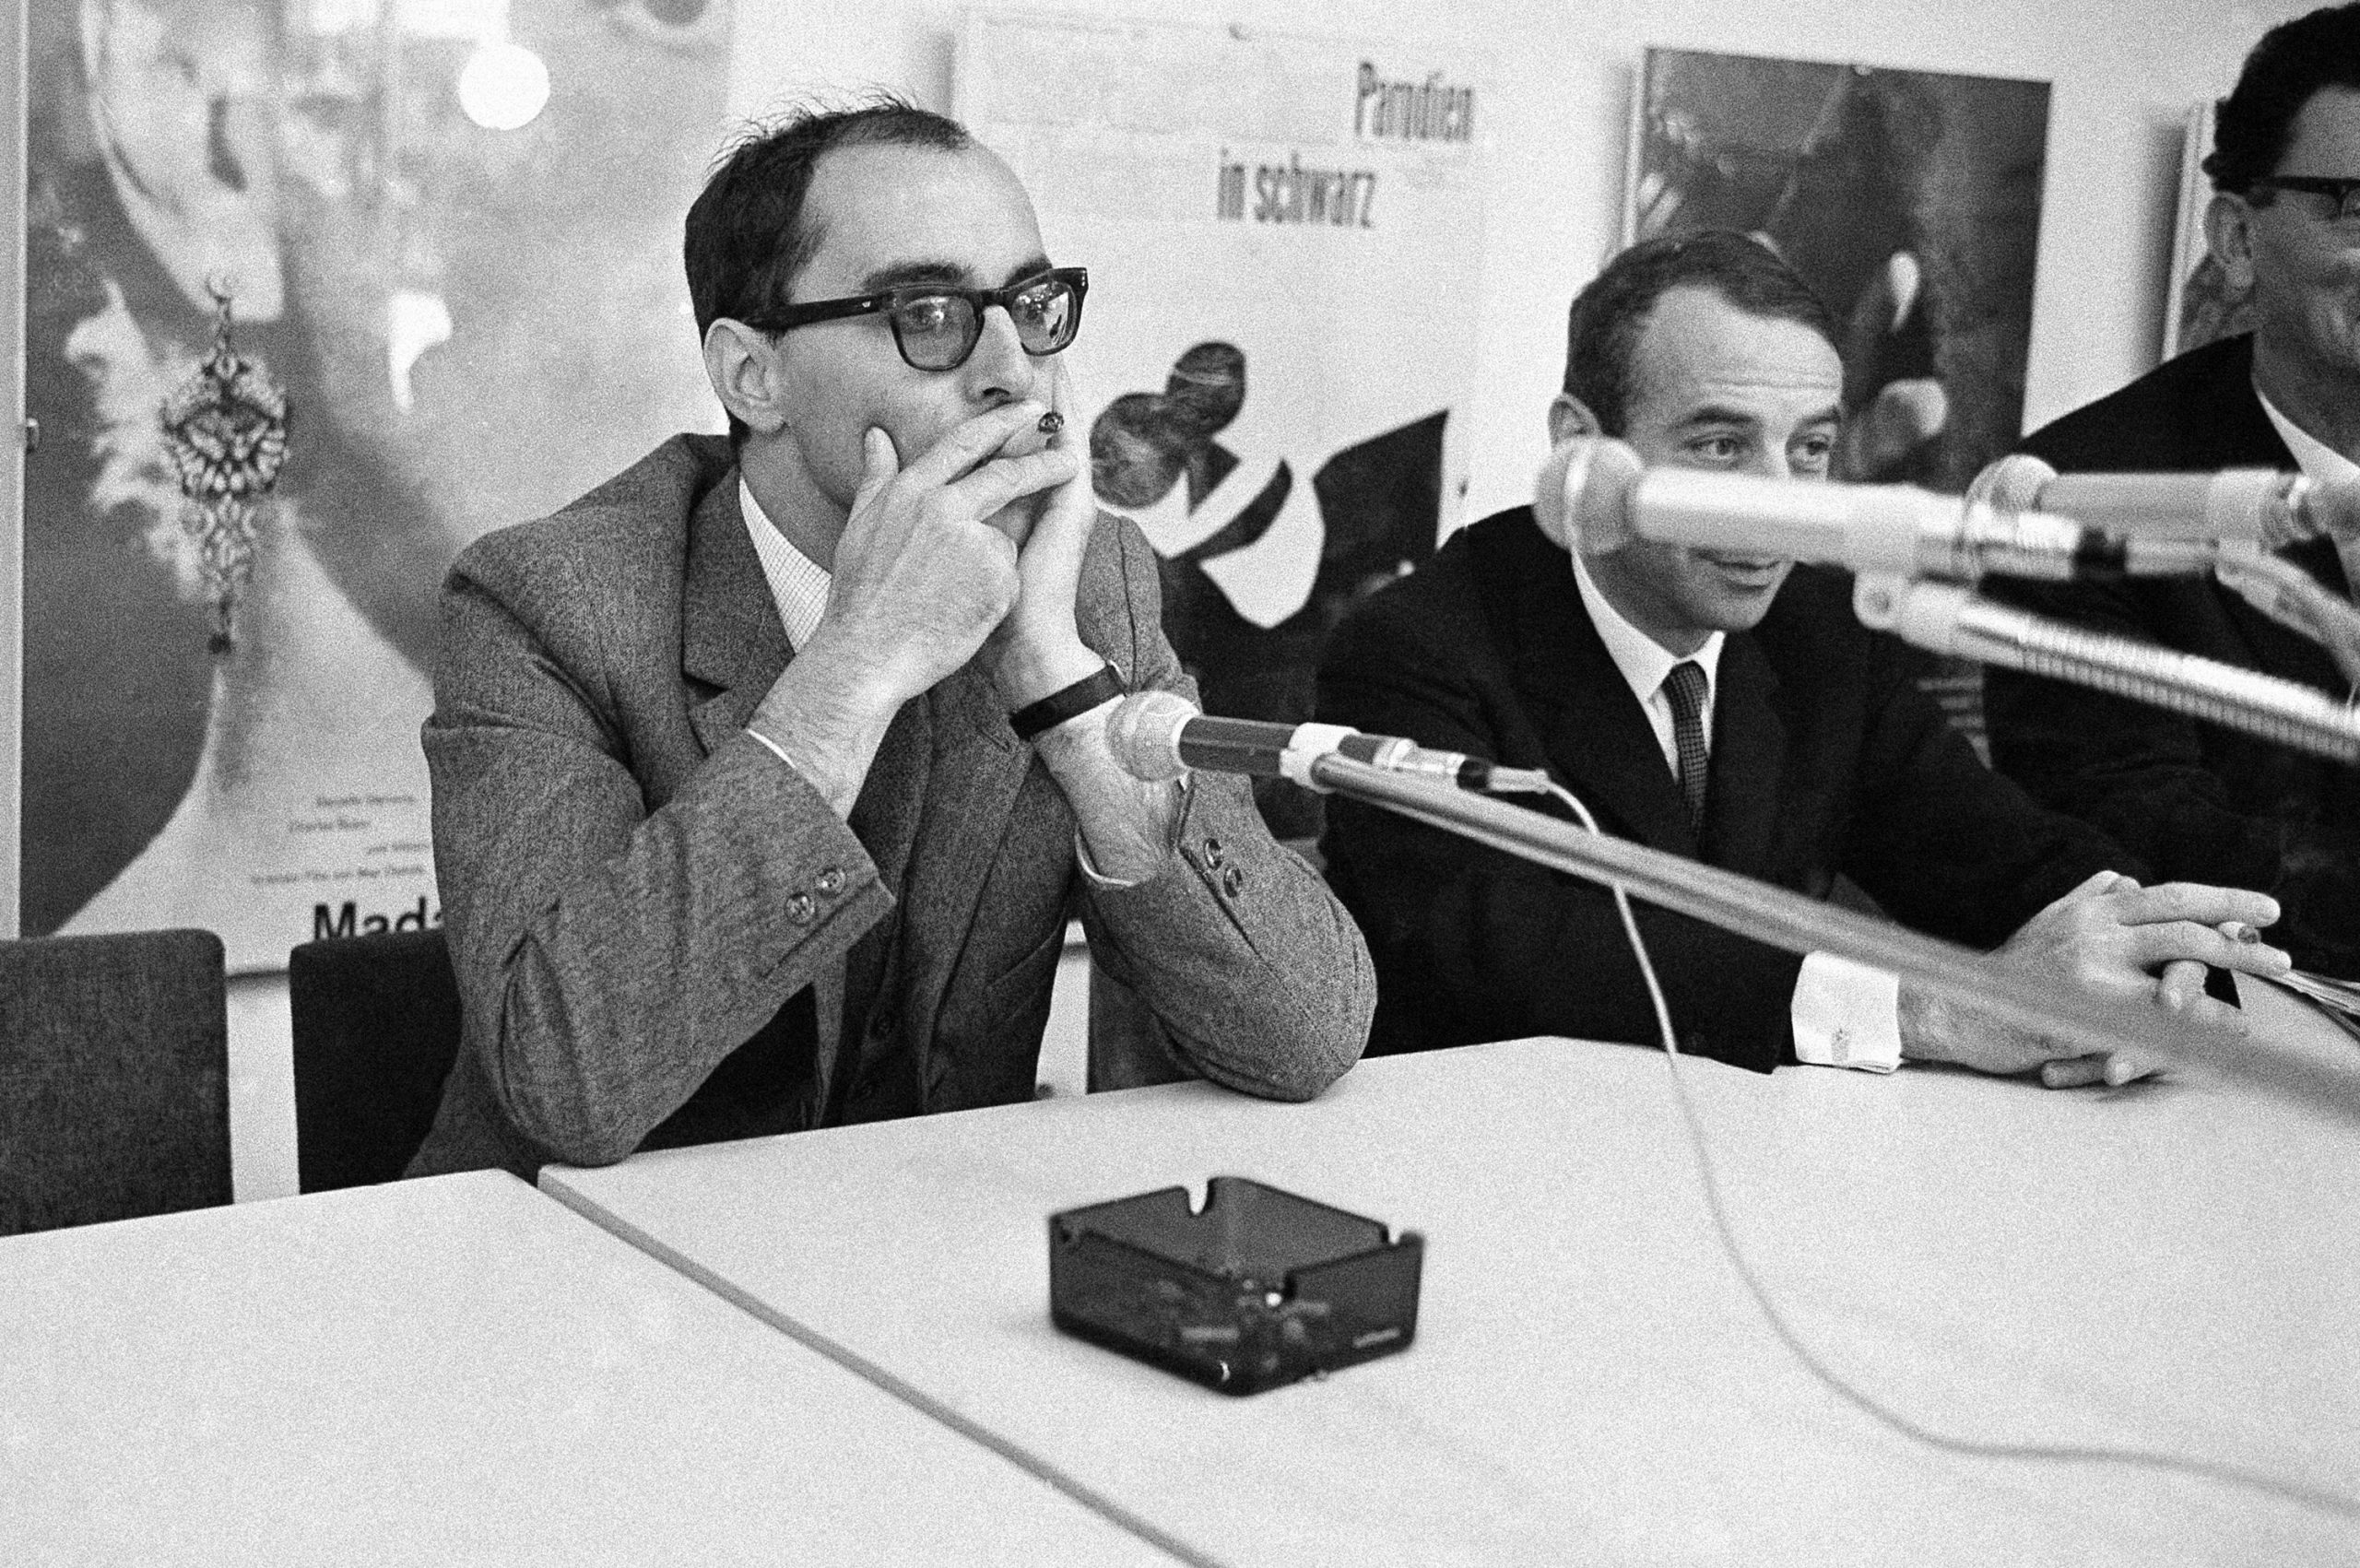 Jean-Luc Godard: Age, family, net worth and filmography